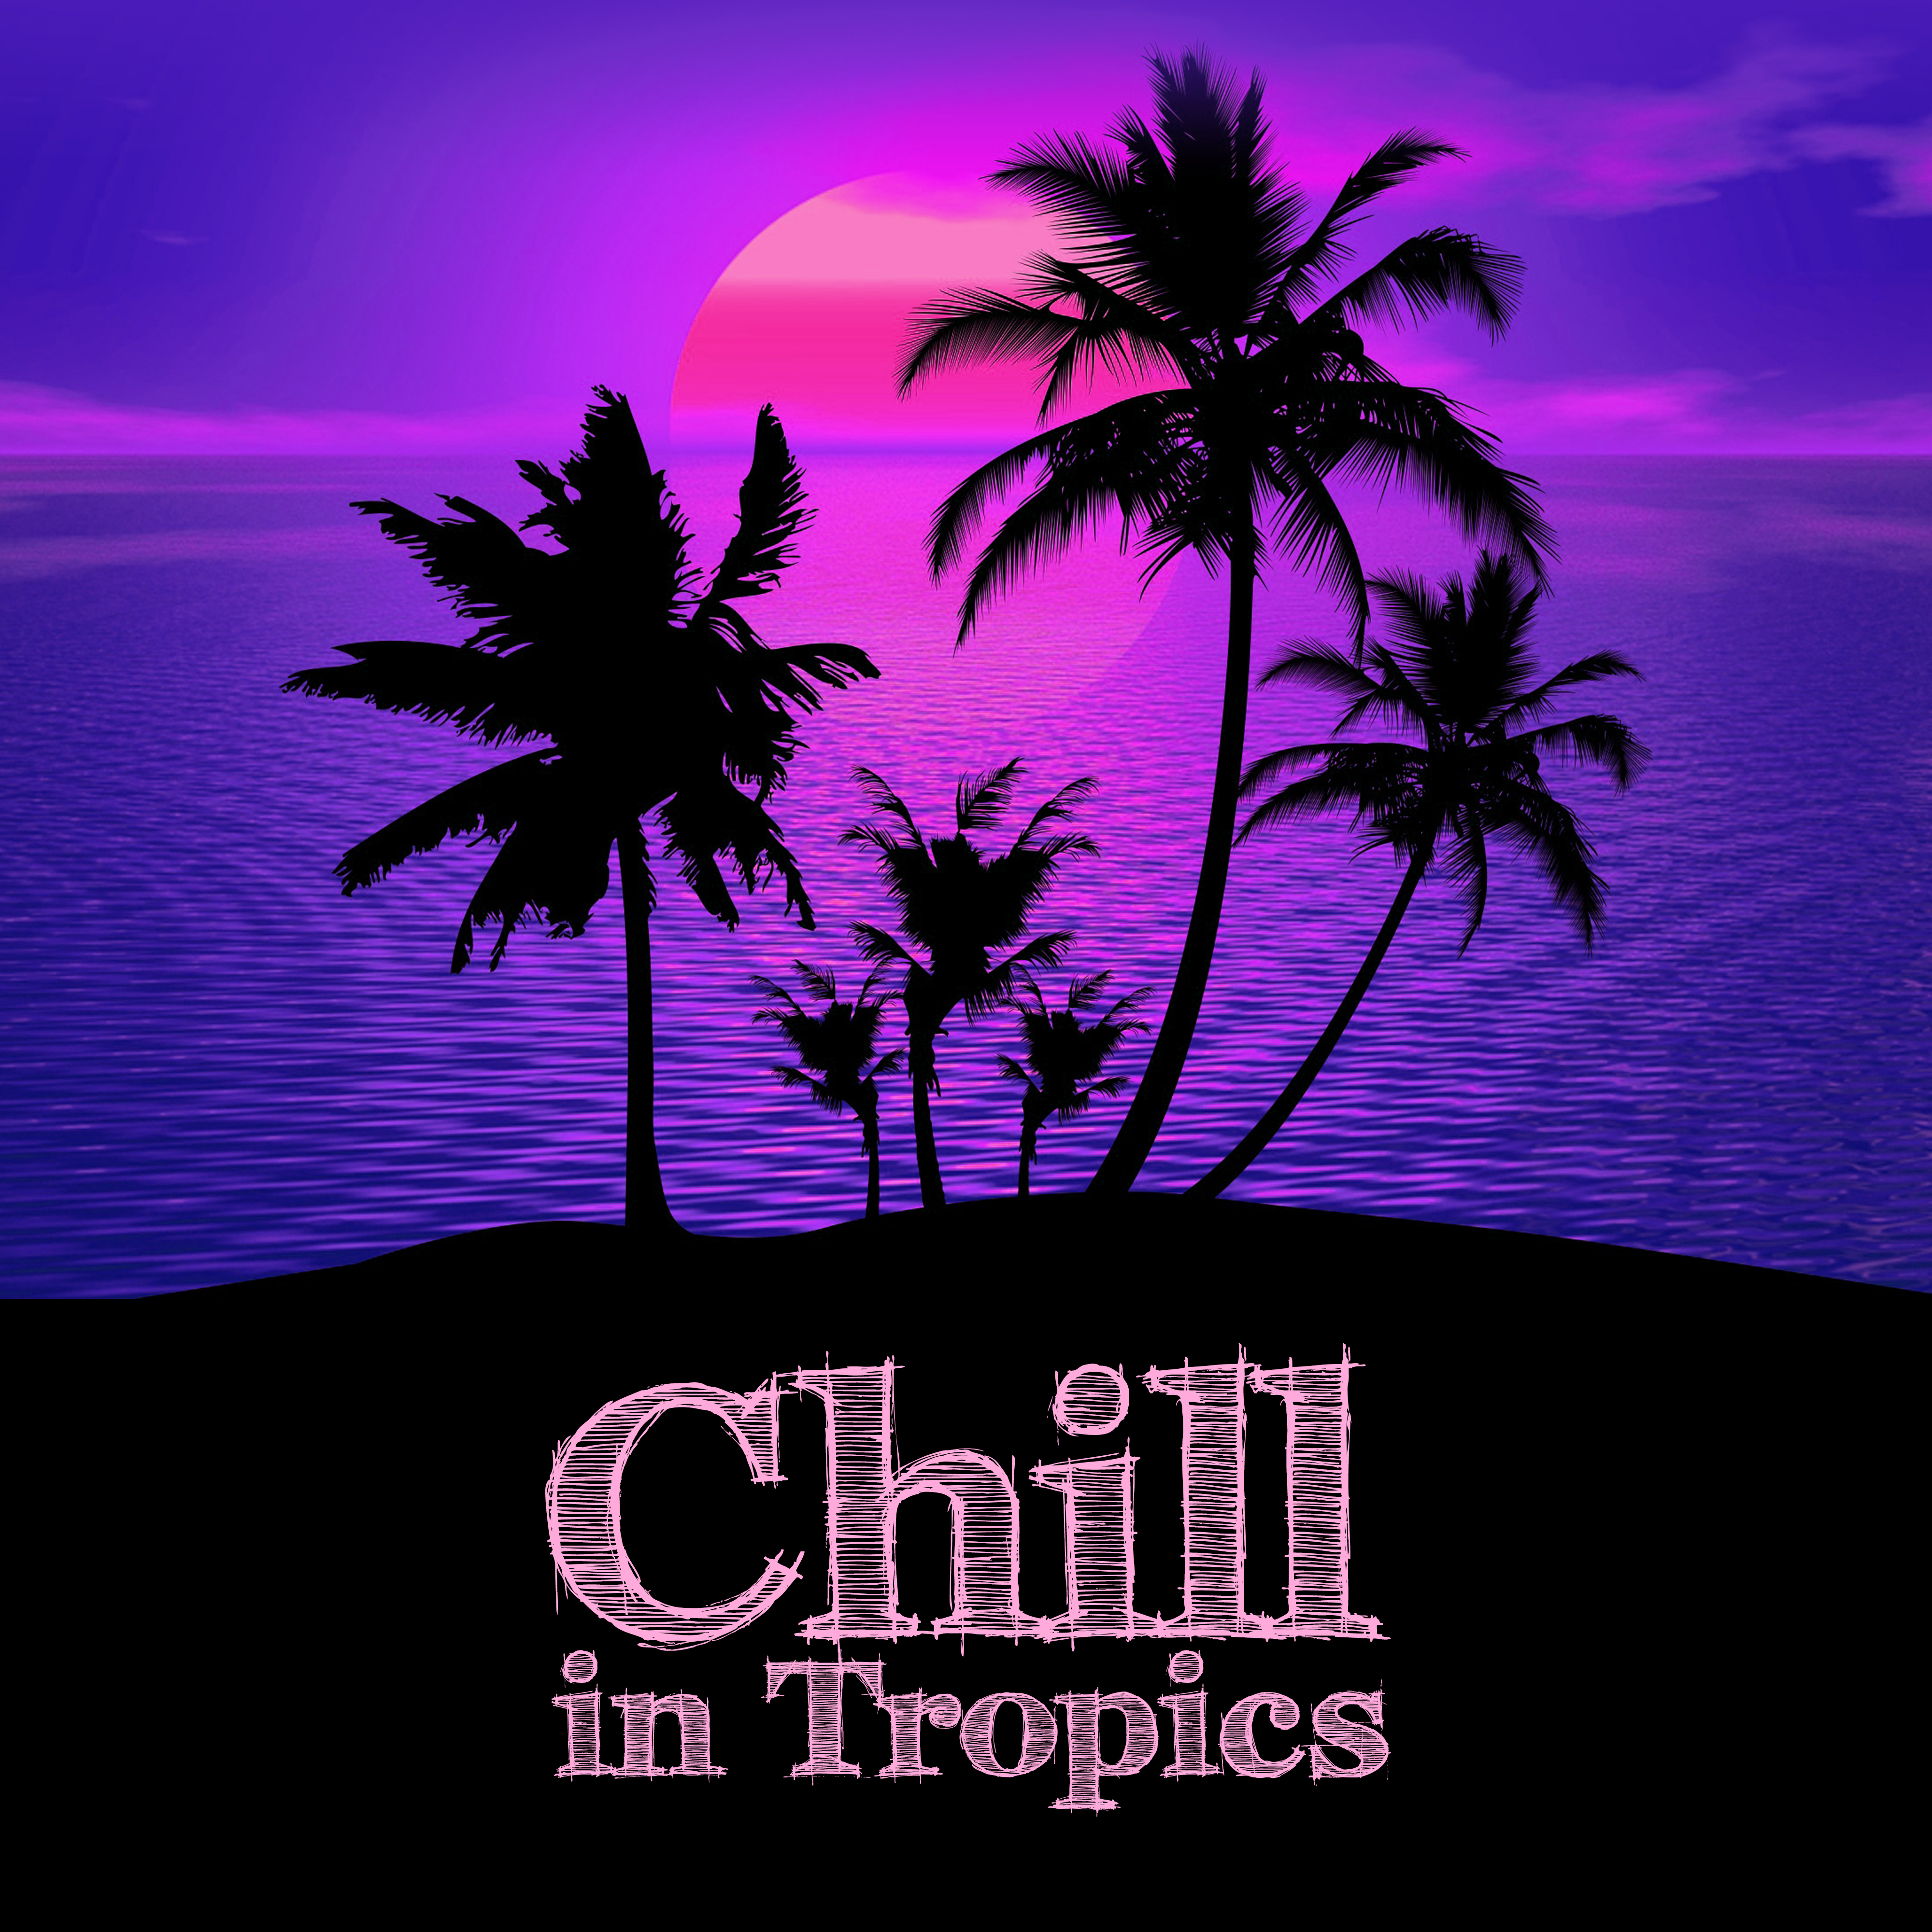 Chill in Tropics  Summer Vibes, Relax Under Palms, Beach Party, Deep Relax, Tropical Lounge Music, Chill House